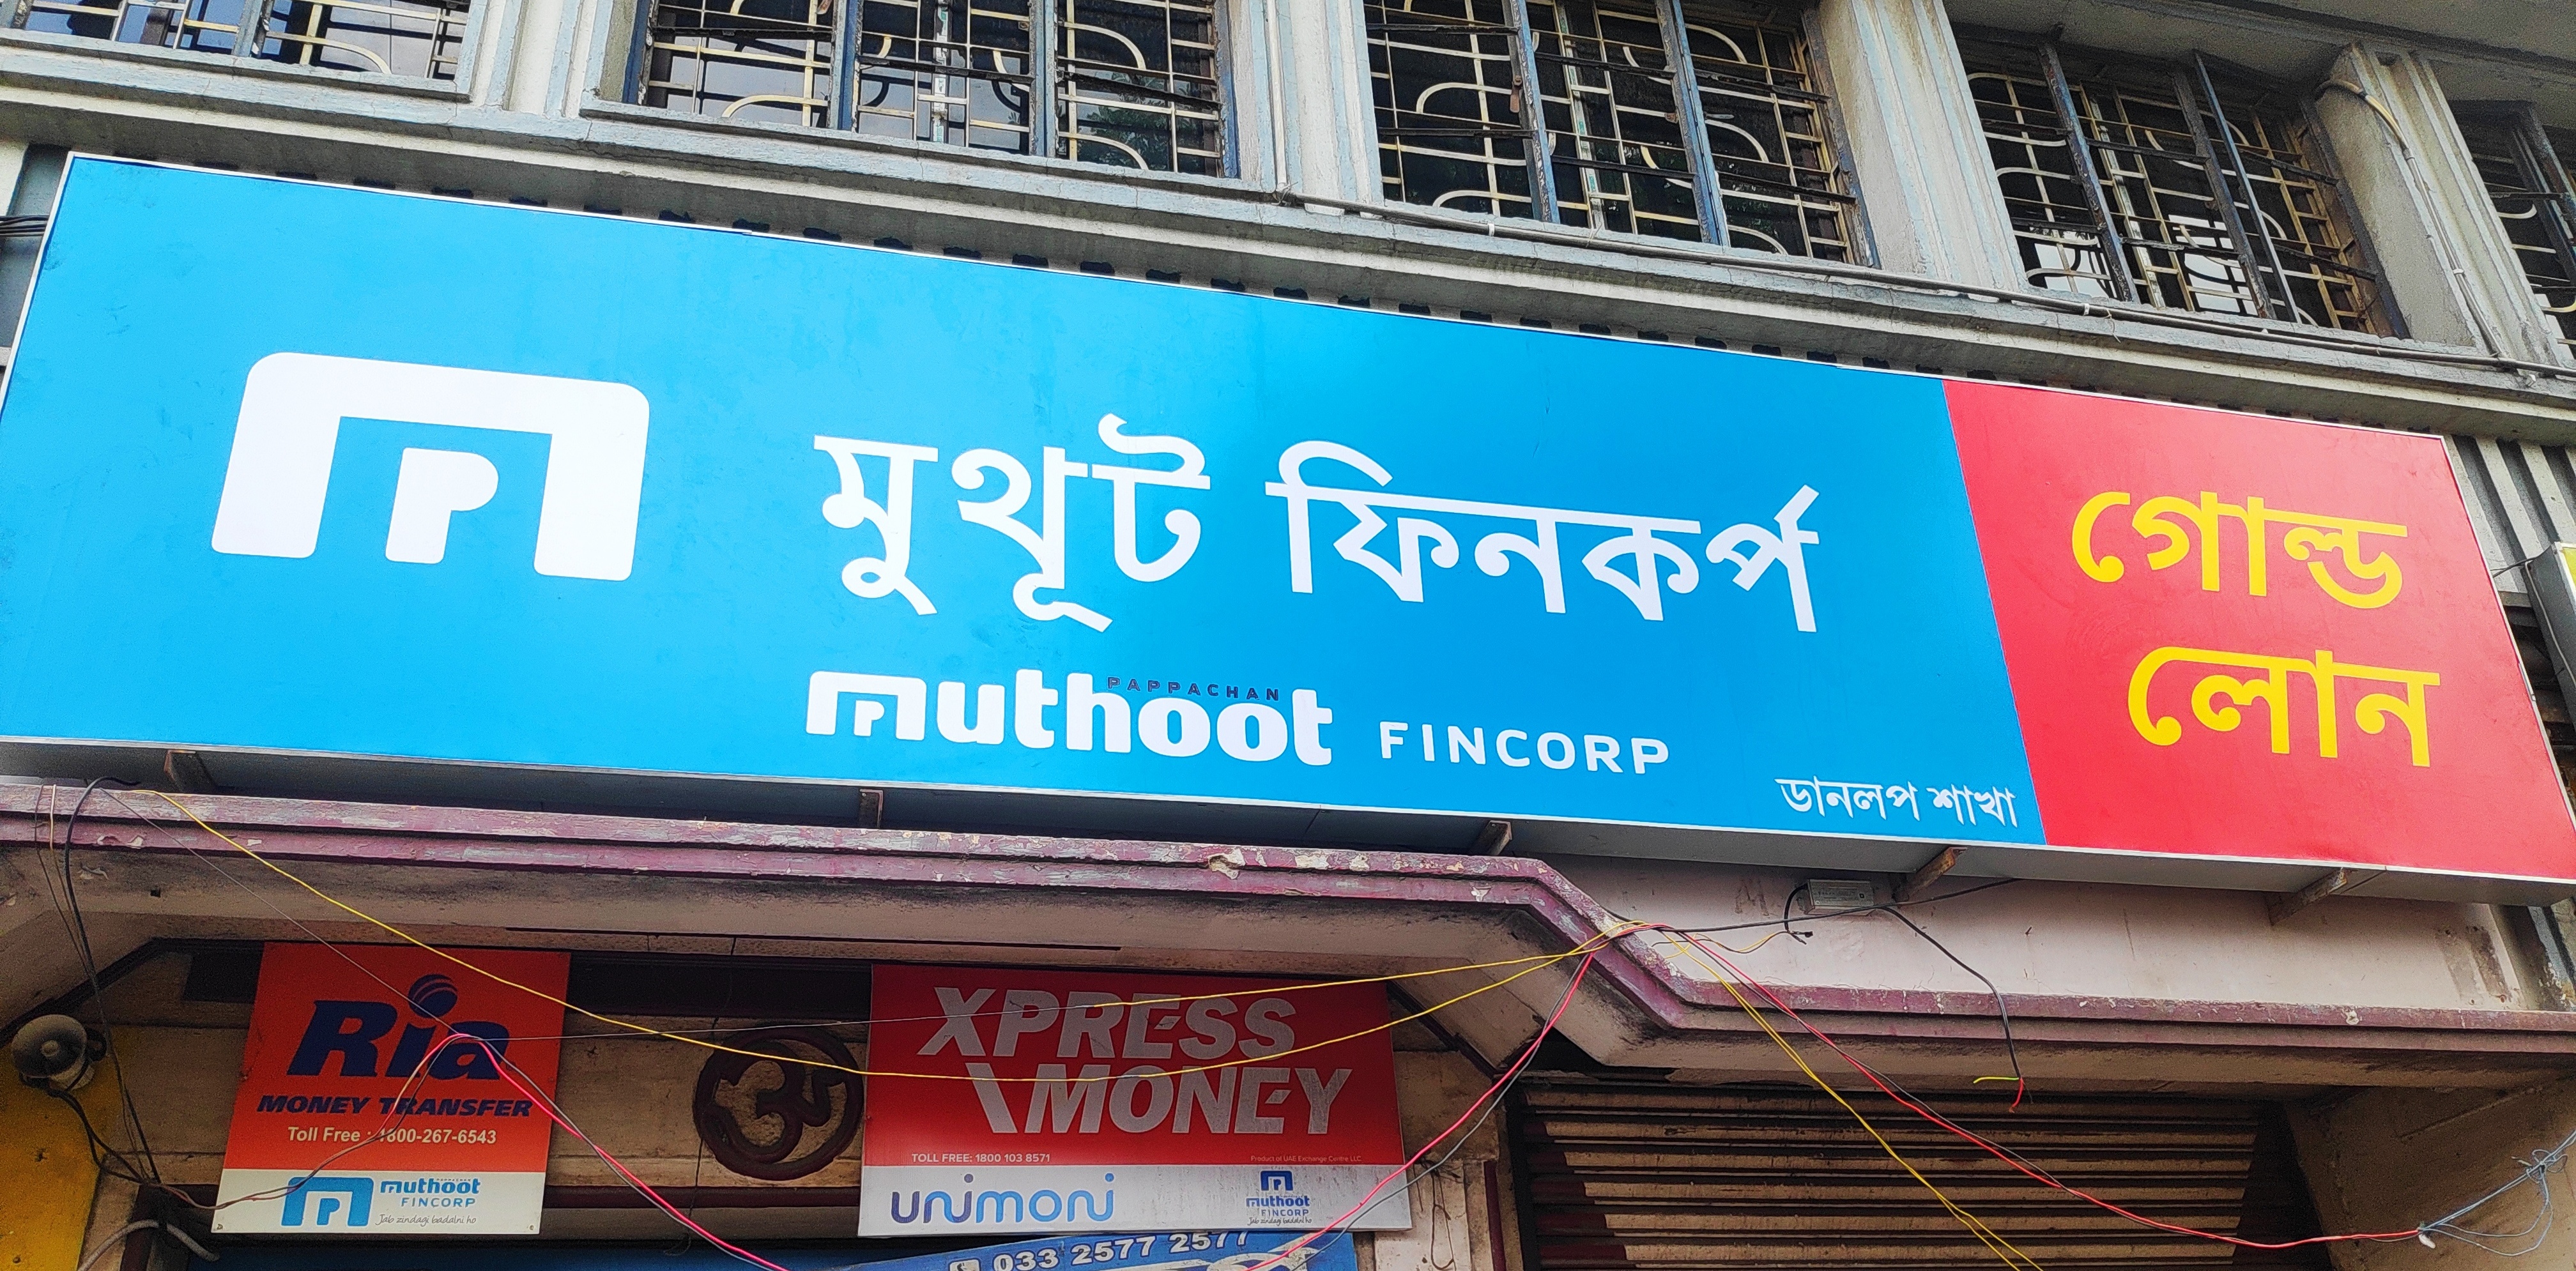 Photos and Videos of Muthoot Fincorp Gold Loan in Dum Dum Cantt, Kolkata